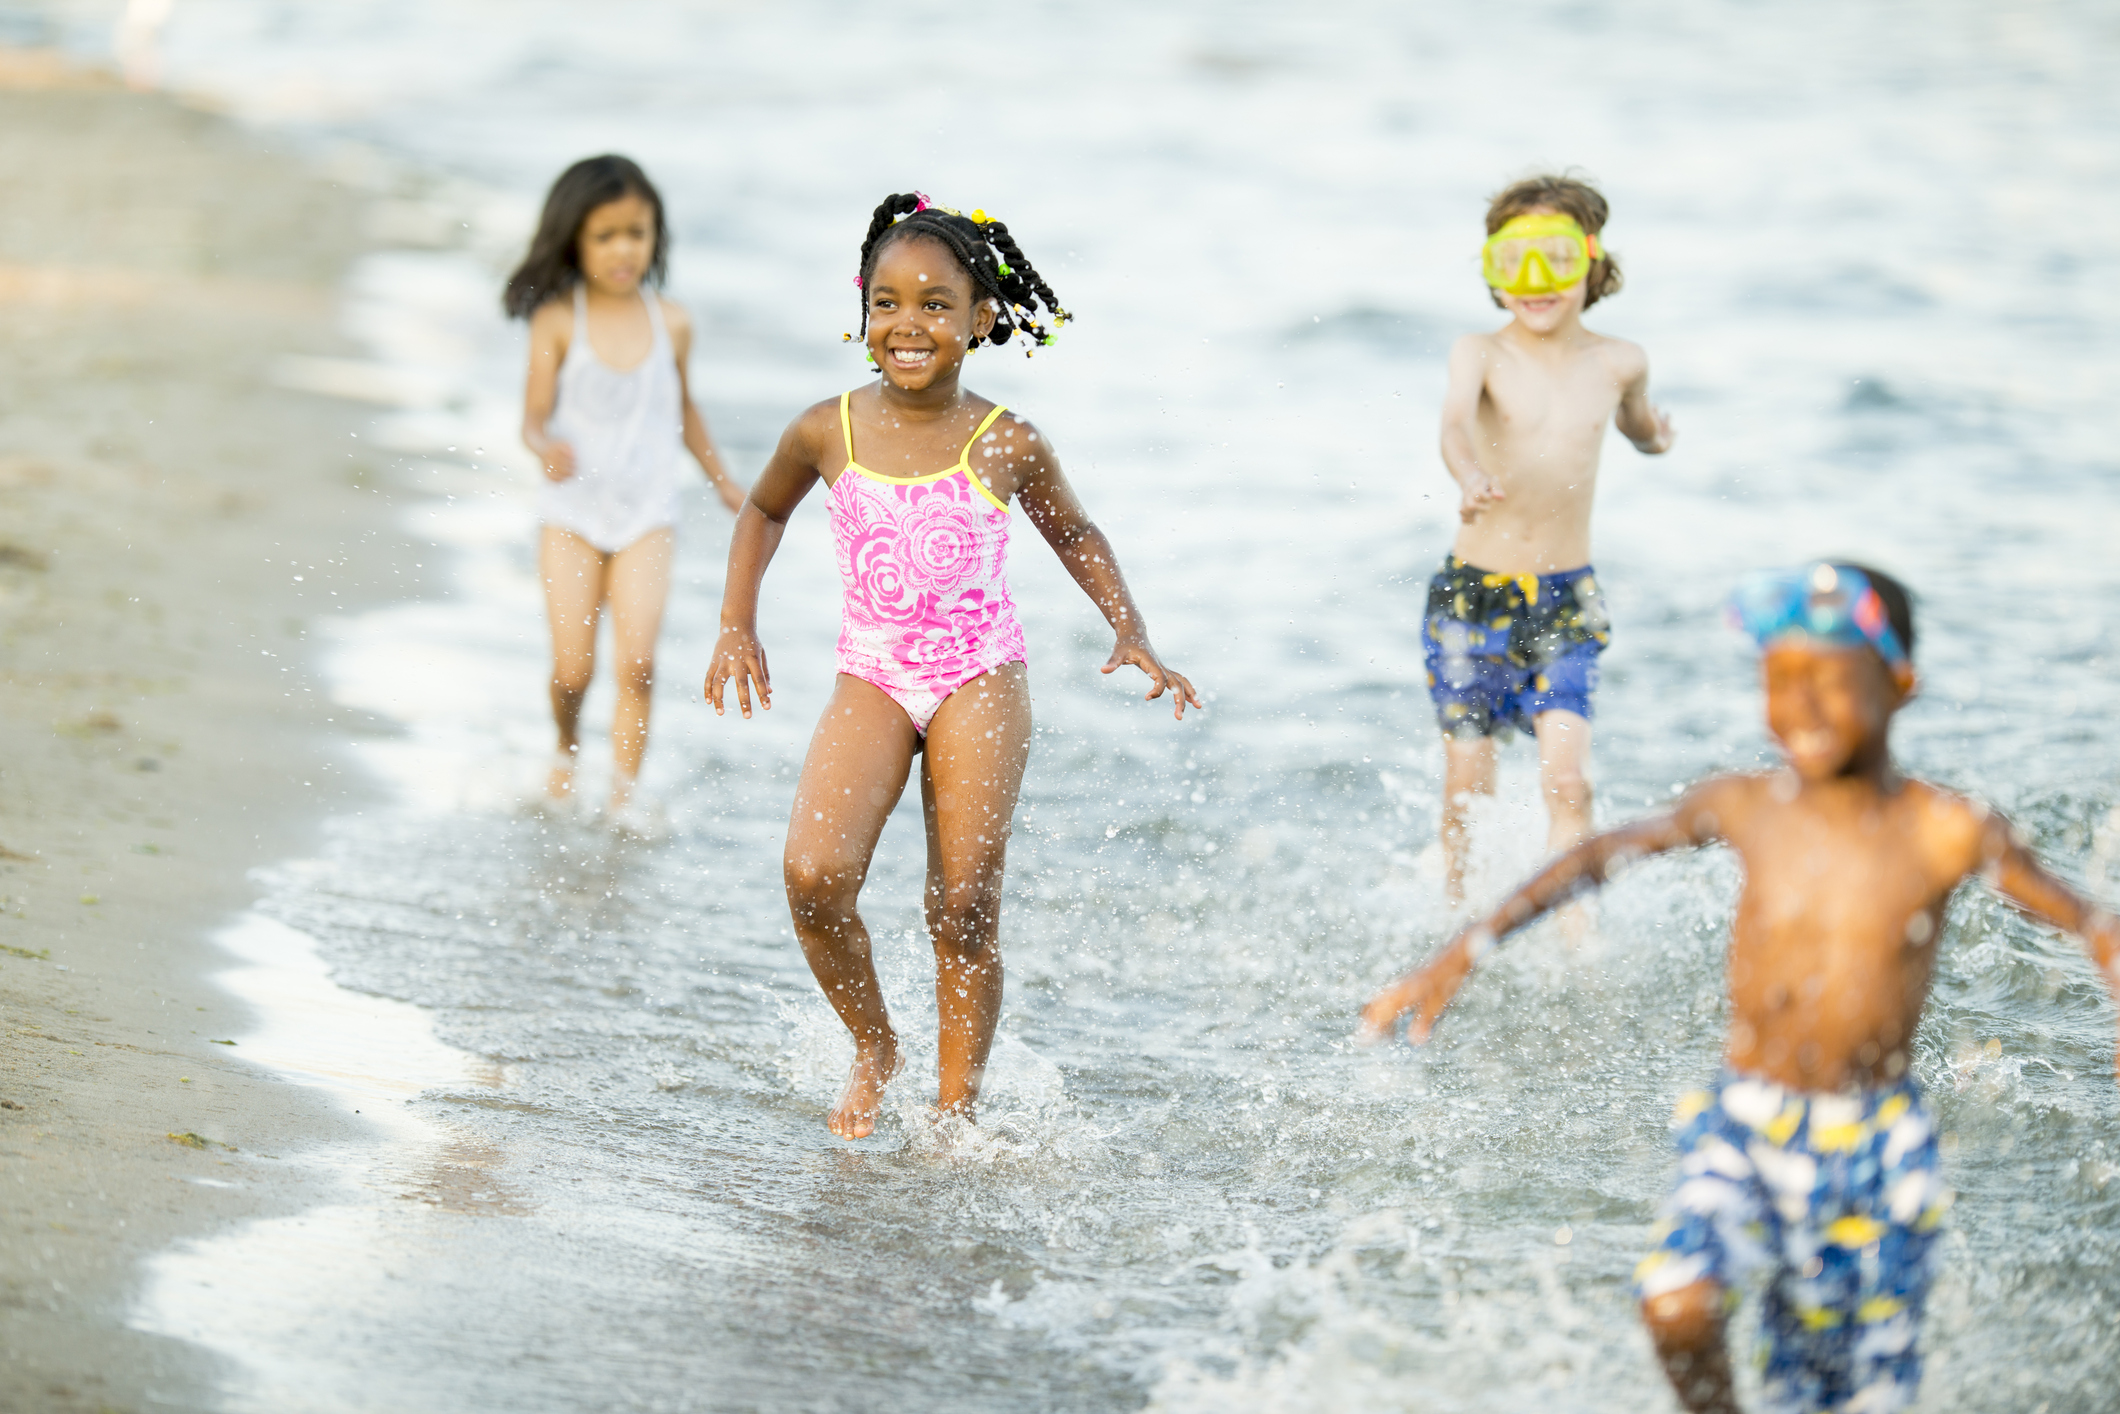 Photo of kids playing in water on a sandy beach